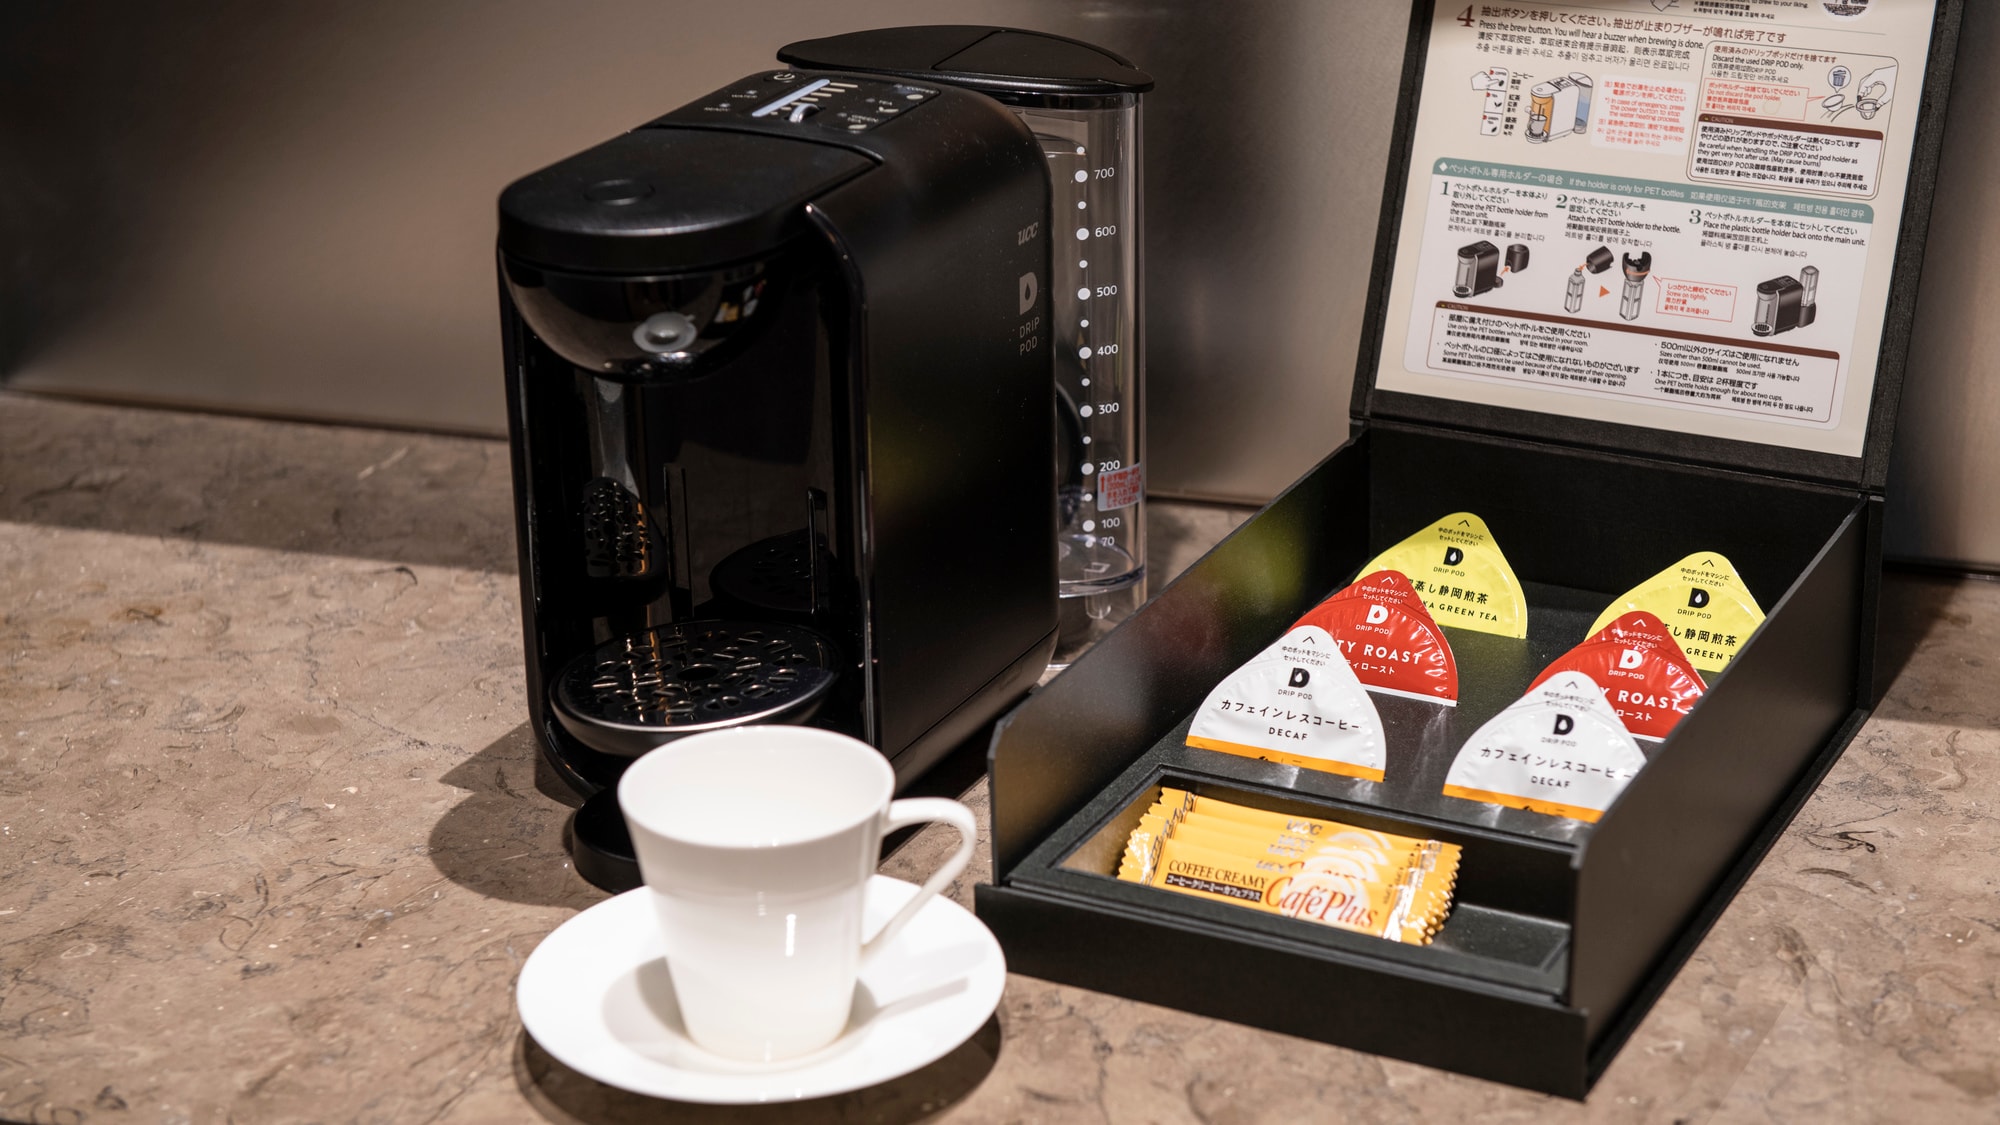 All rooms are equipped with capsule coffee machines